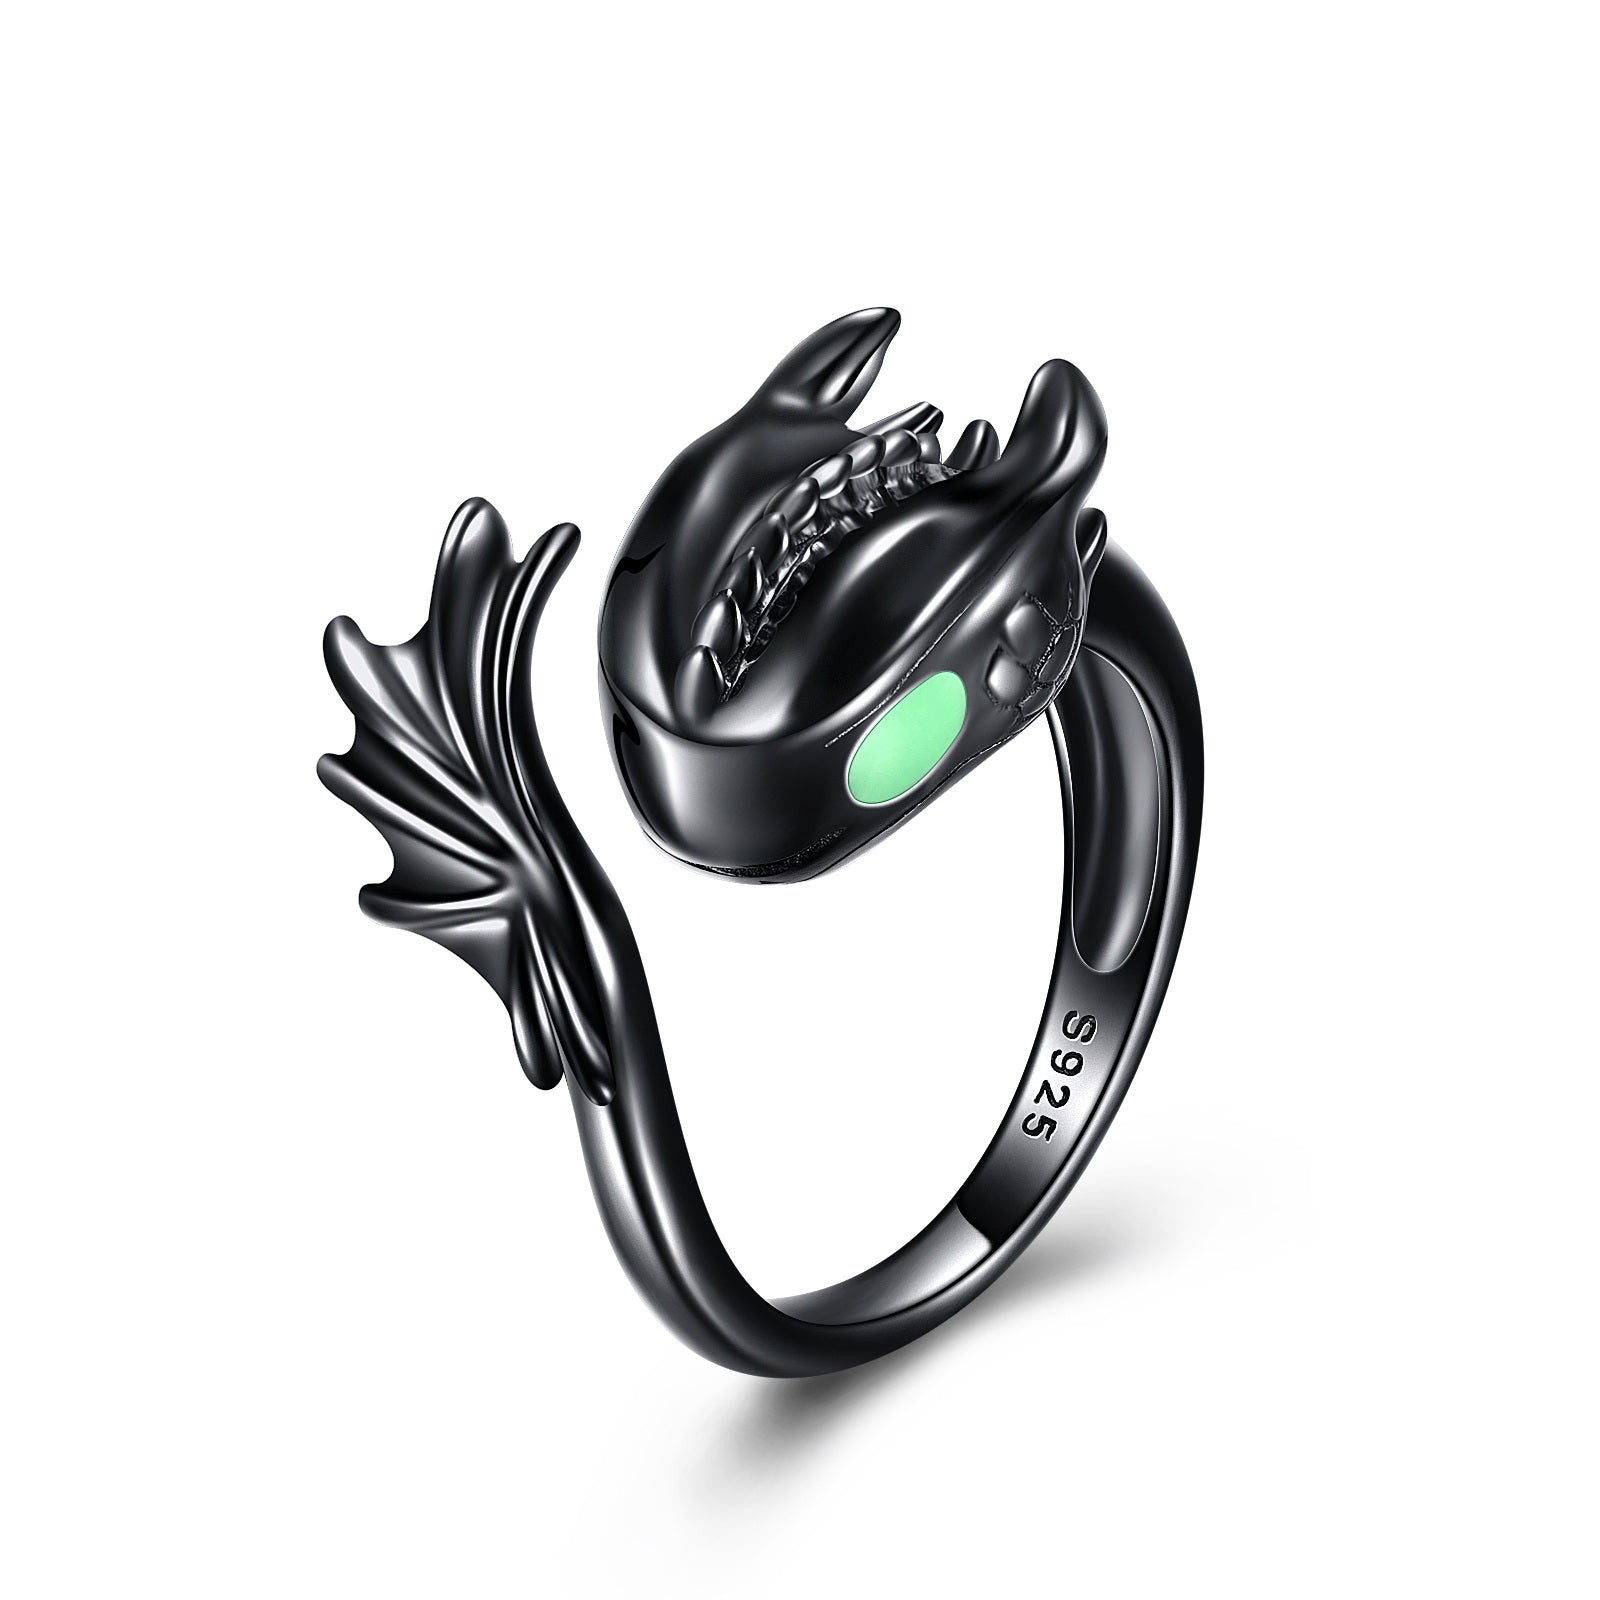 Sterling Silver Black Dragon Ring Jewelry Gifts for Men Women